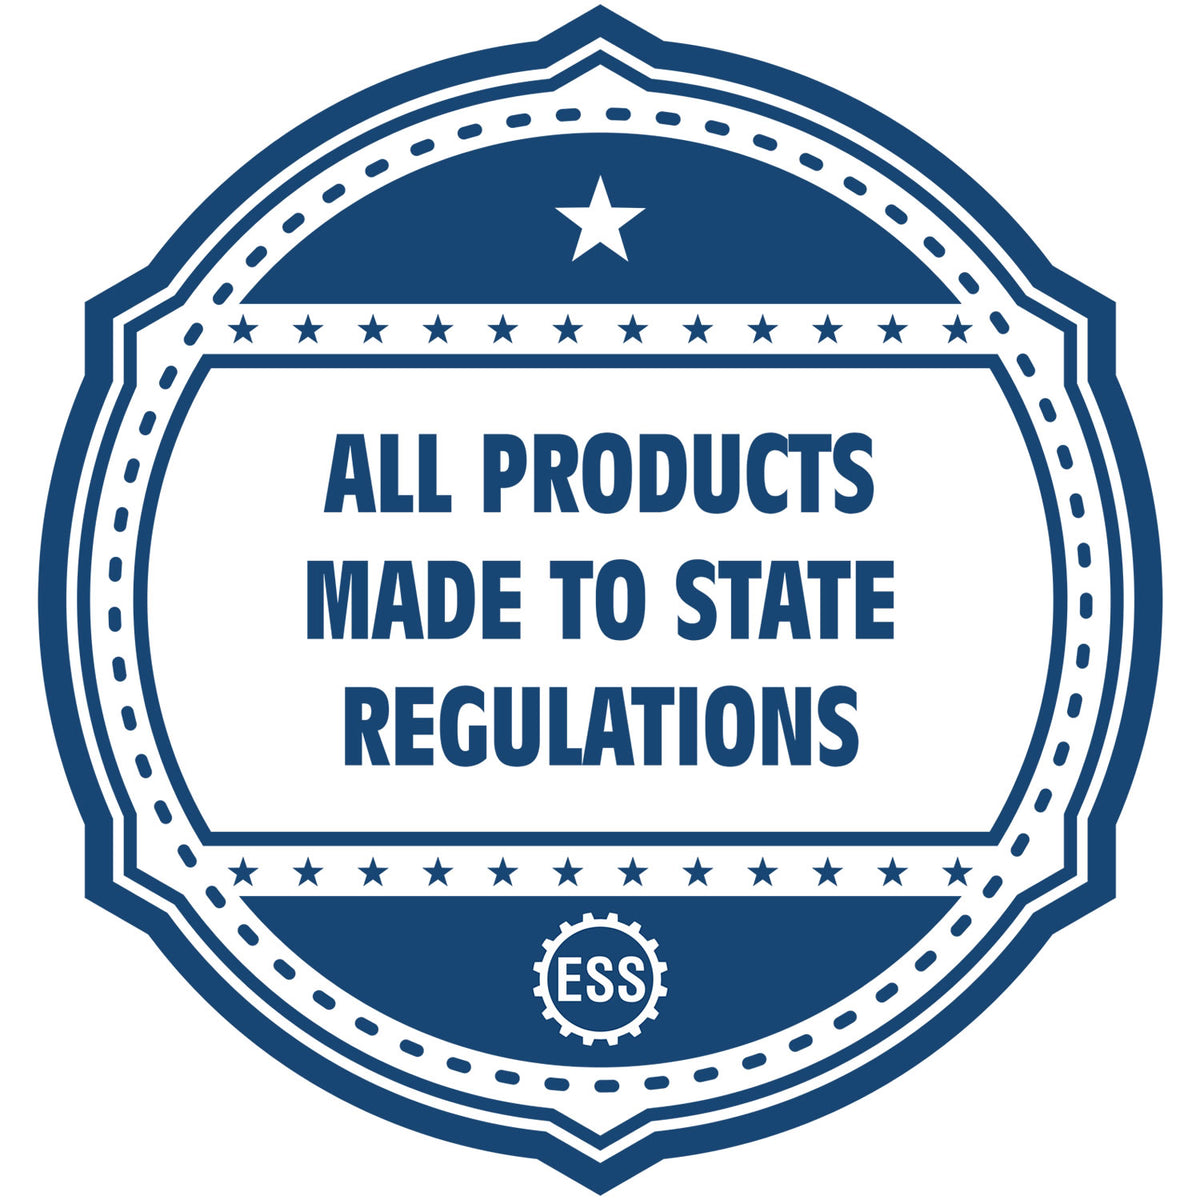 A blue icon or badge for the Hybrid Michigan Land Surveyor Seal showing that this product is made in compliance with state regulations.